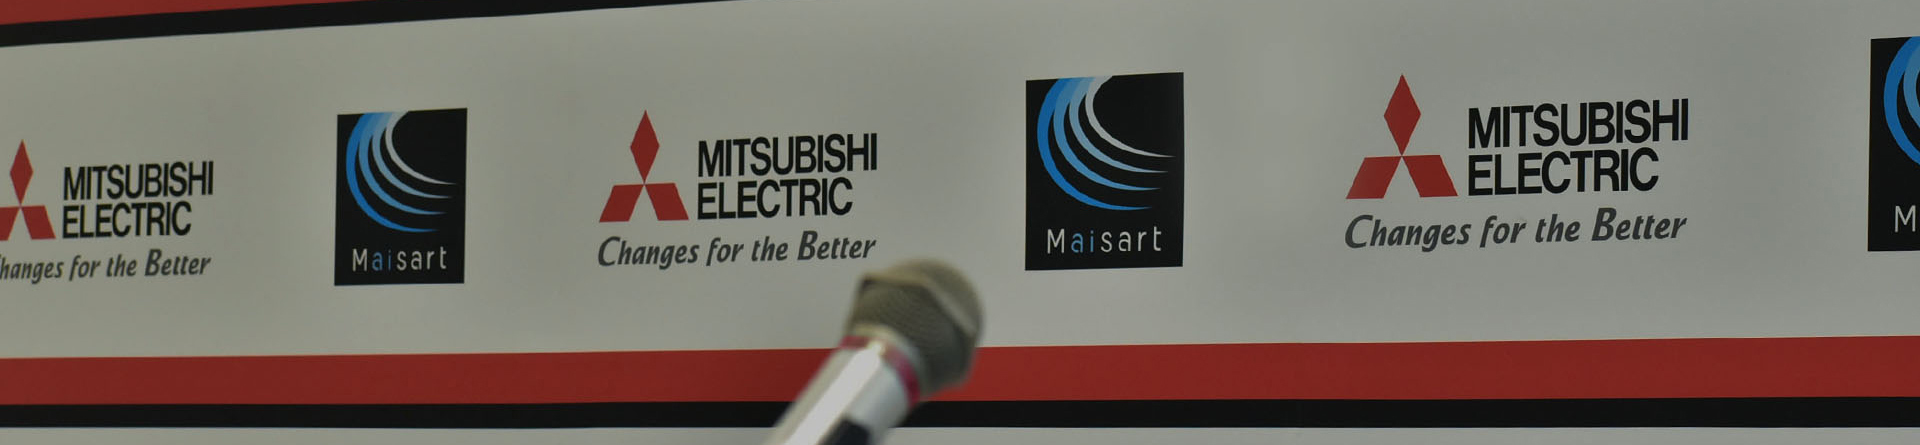 Mitsubishi Electric’s Factory Automation Systems Business  to Launch “Automating the World” as Global Slogan